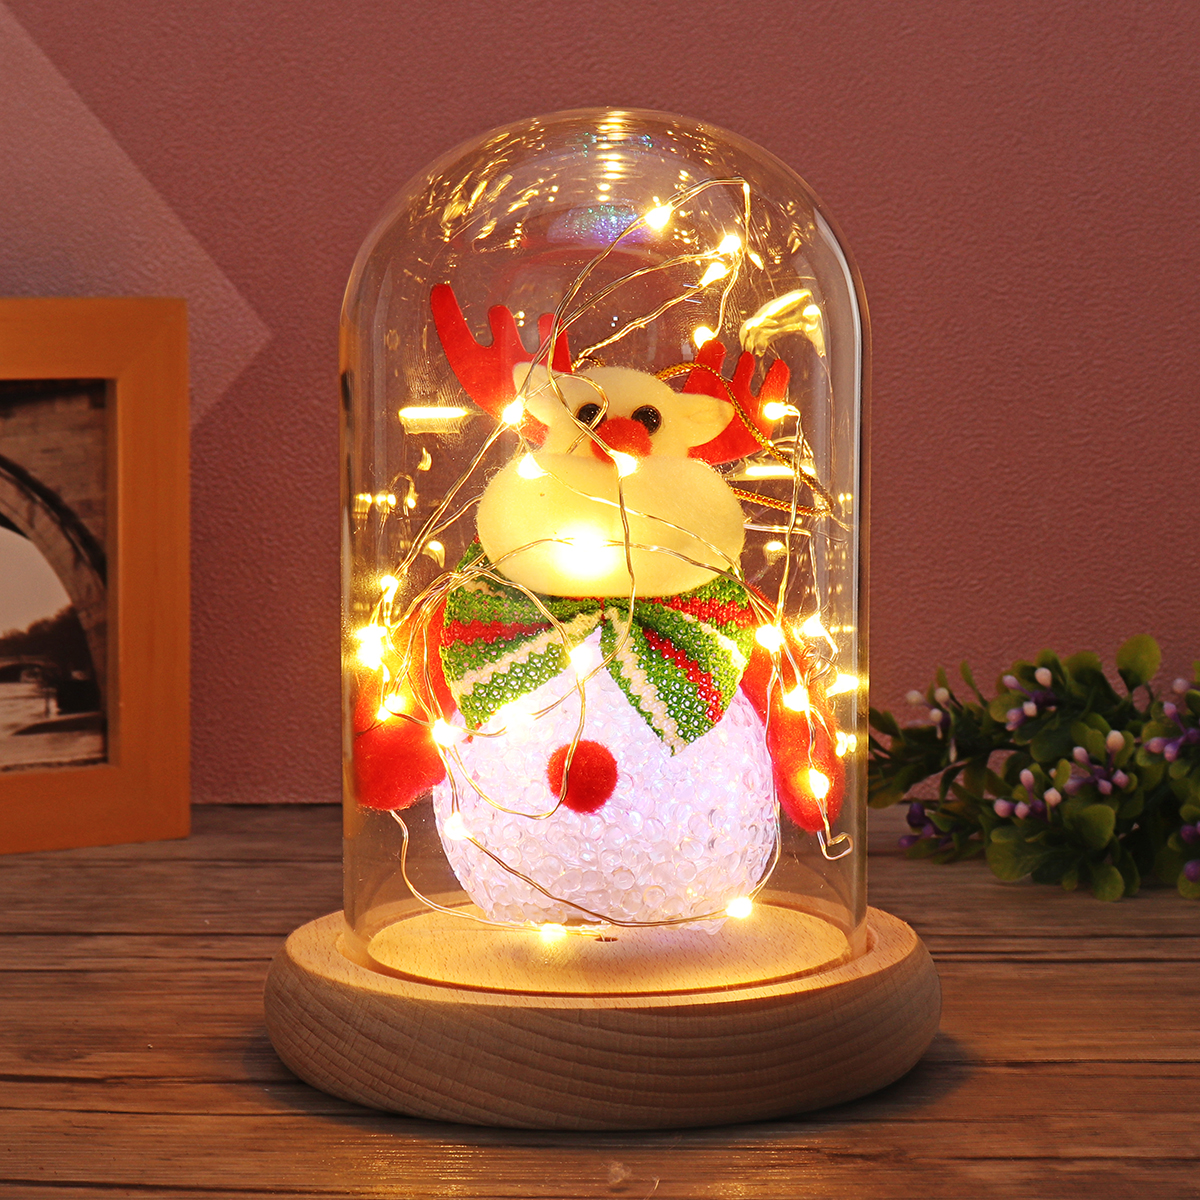 

9x15cm Glass Dome Bell Jar Cloche Display Wooden Base With Fairy LED Light Decorations Christmas Gift